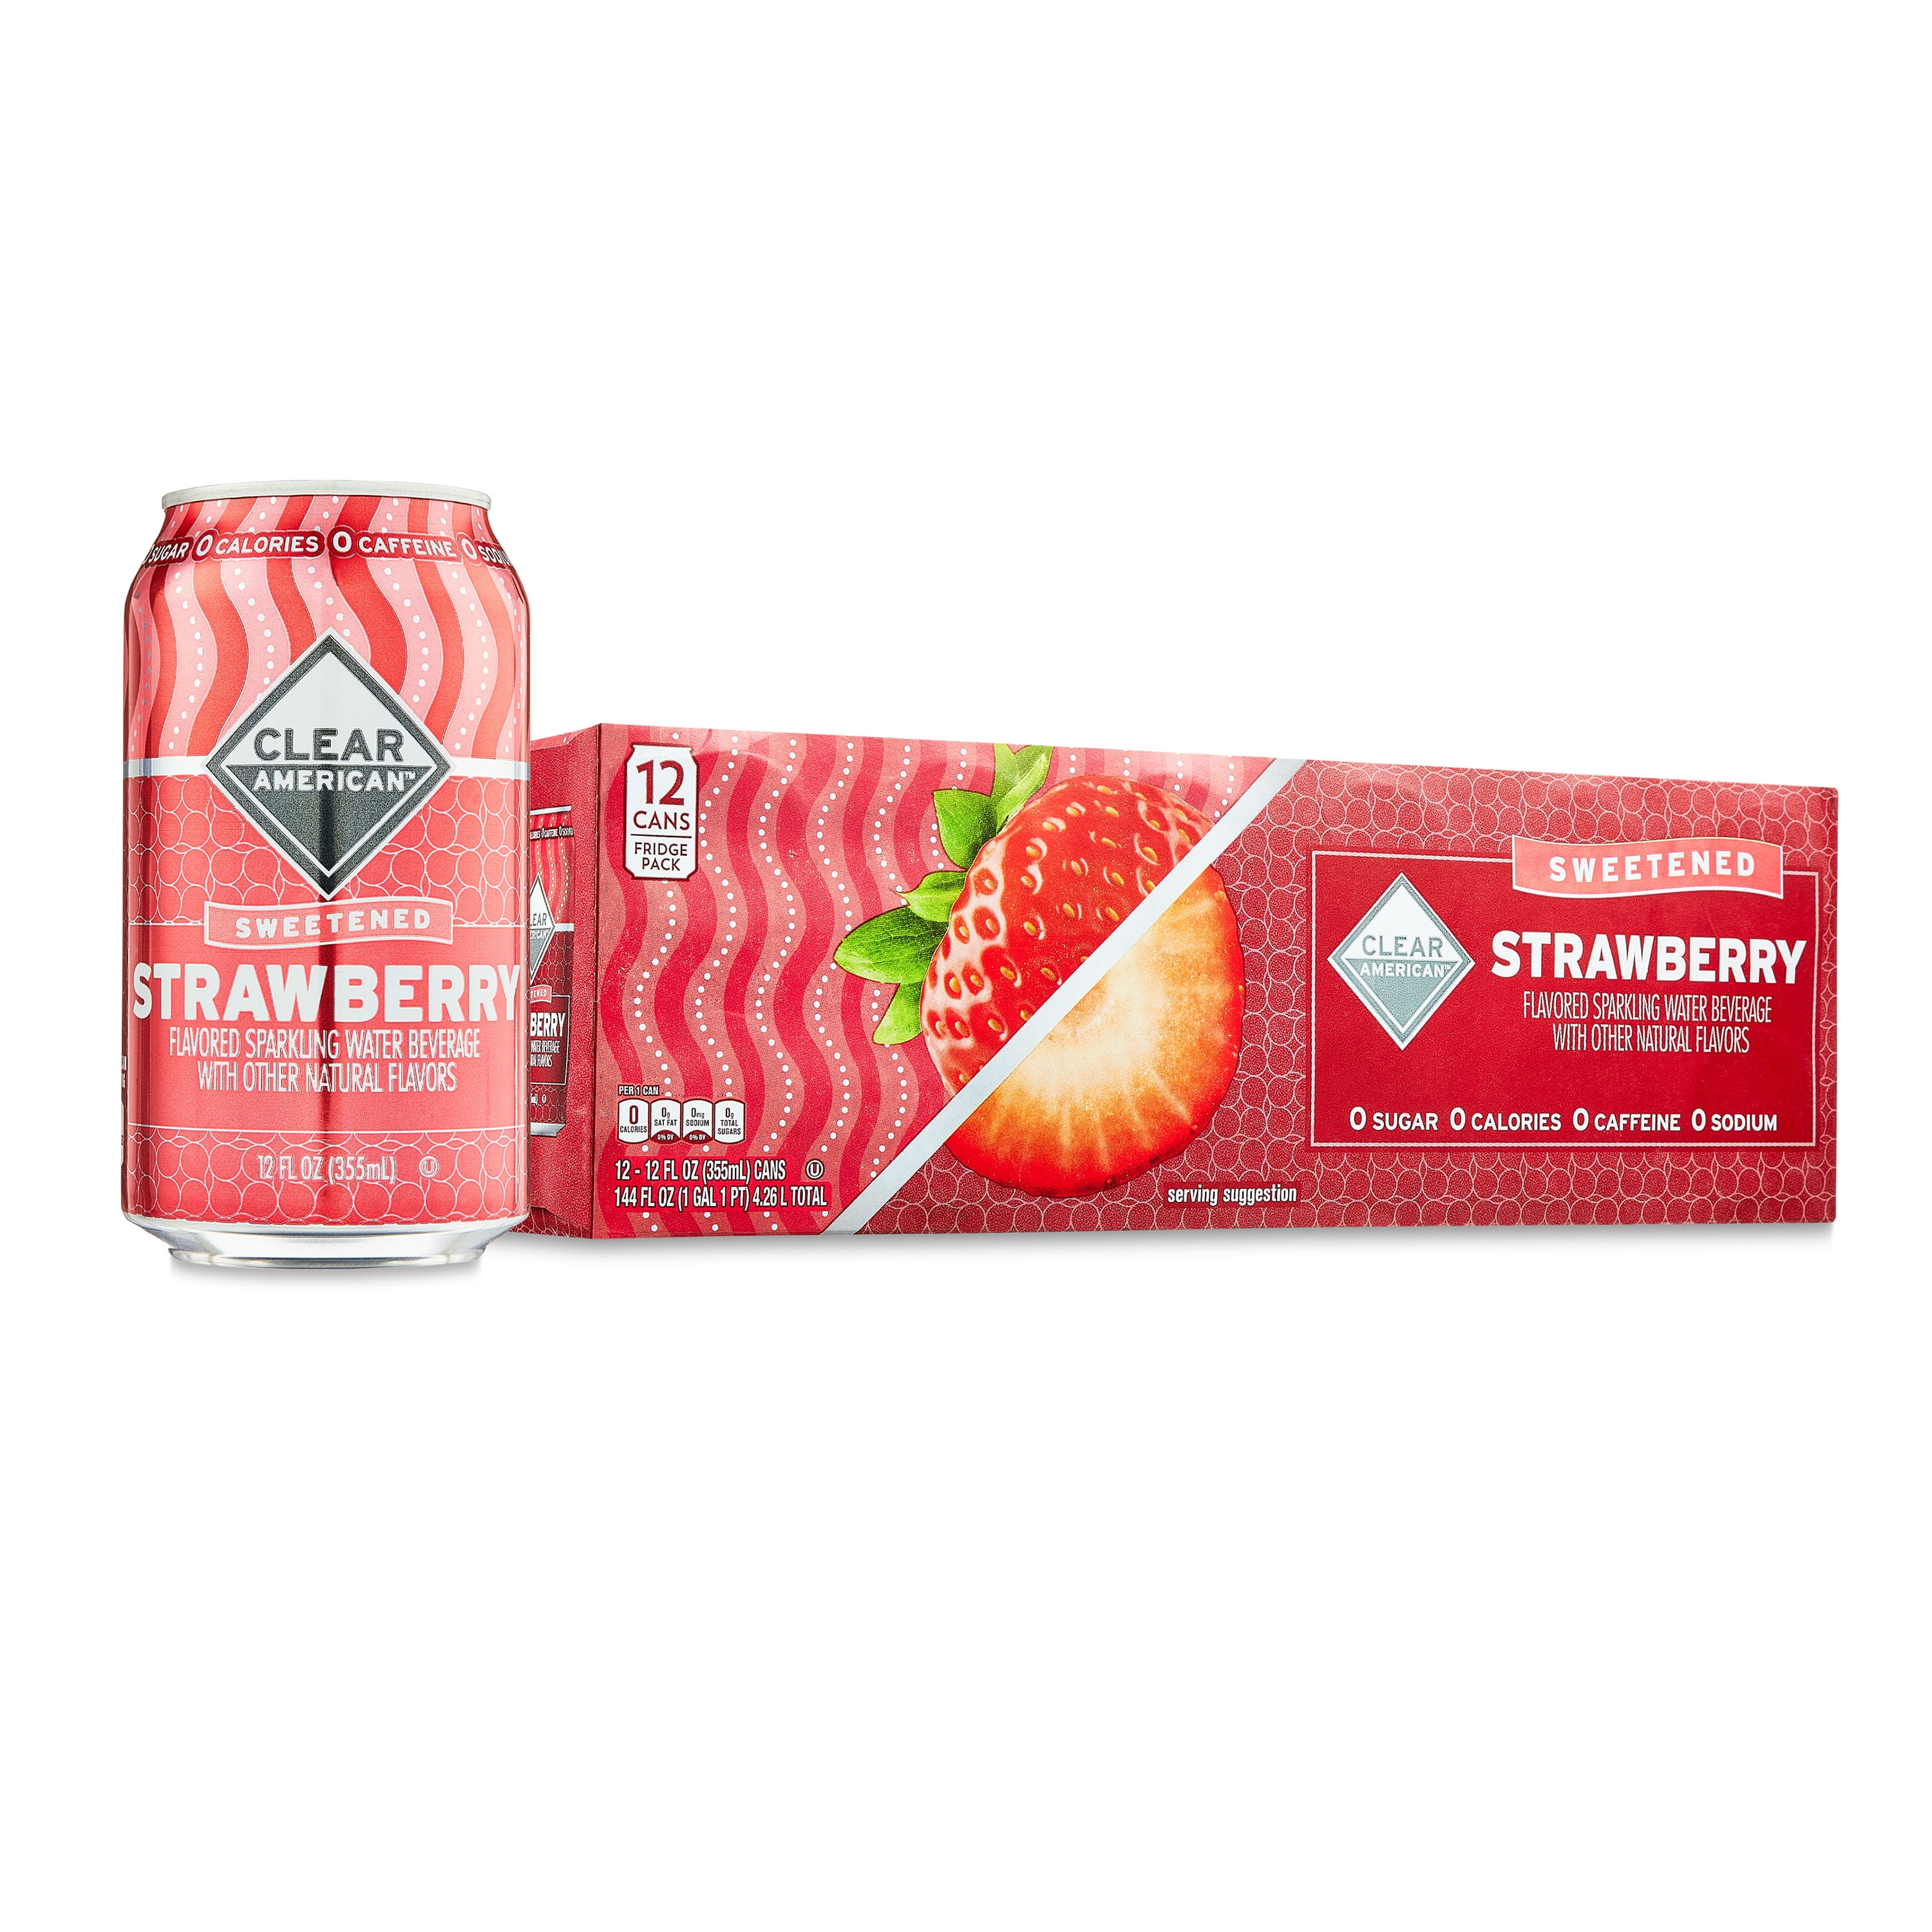 Clear American Sparkling Water, Strawberry - 12 pack, 12 fl oz cans